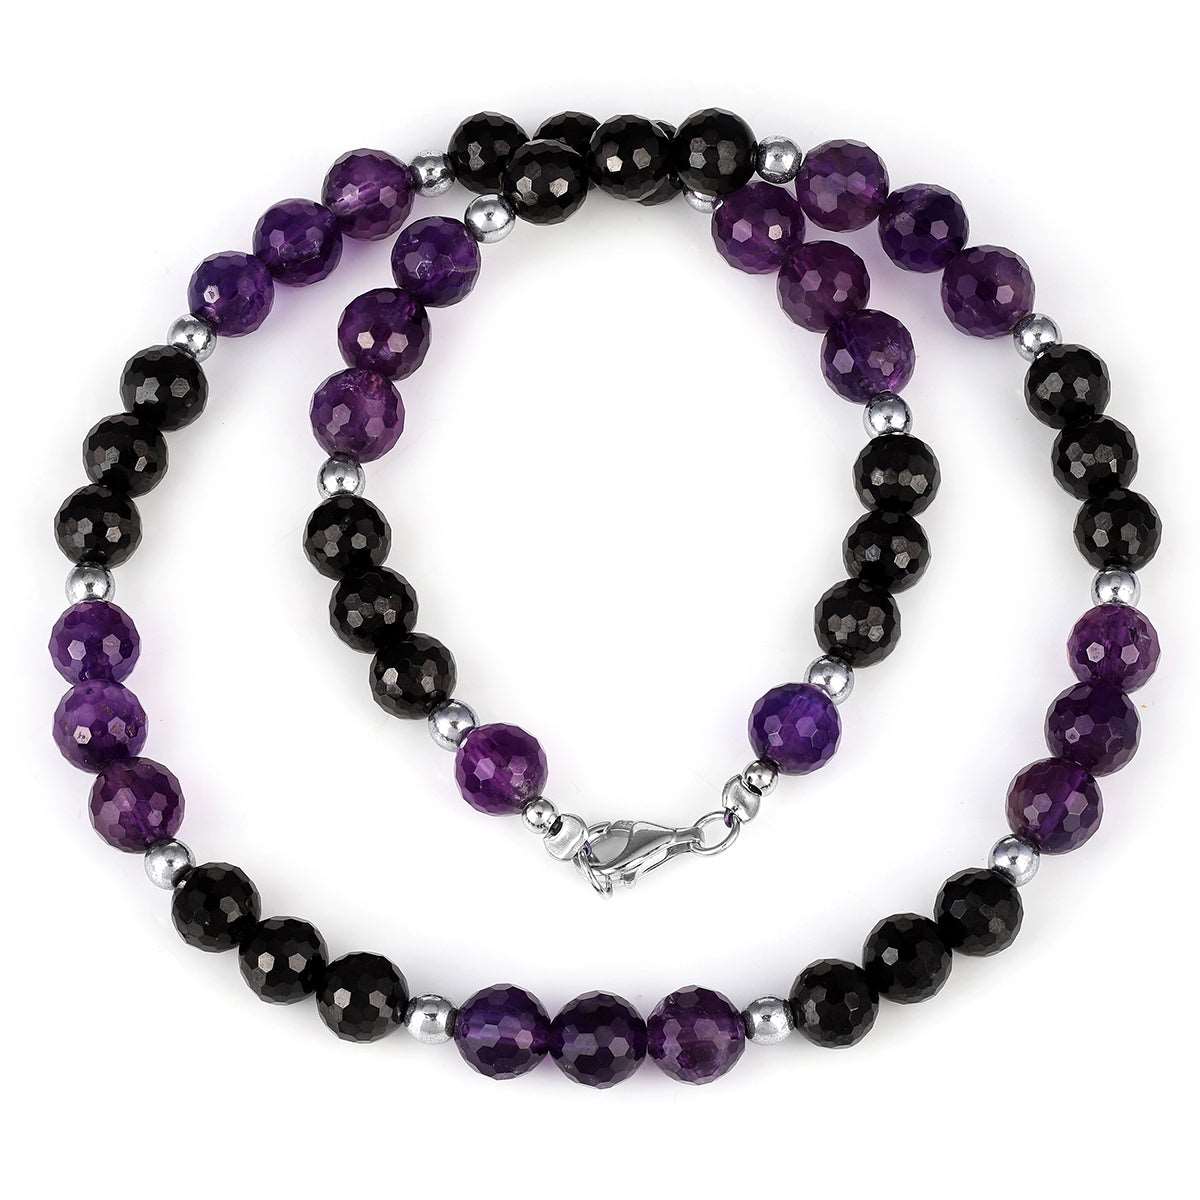 Amethyst and Black Spinel Choker Necklace